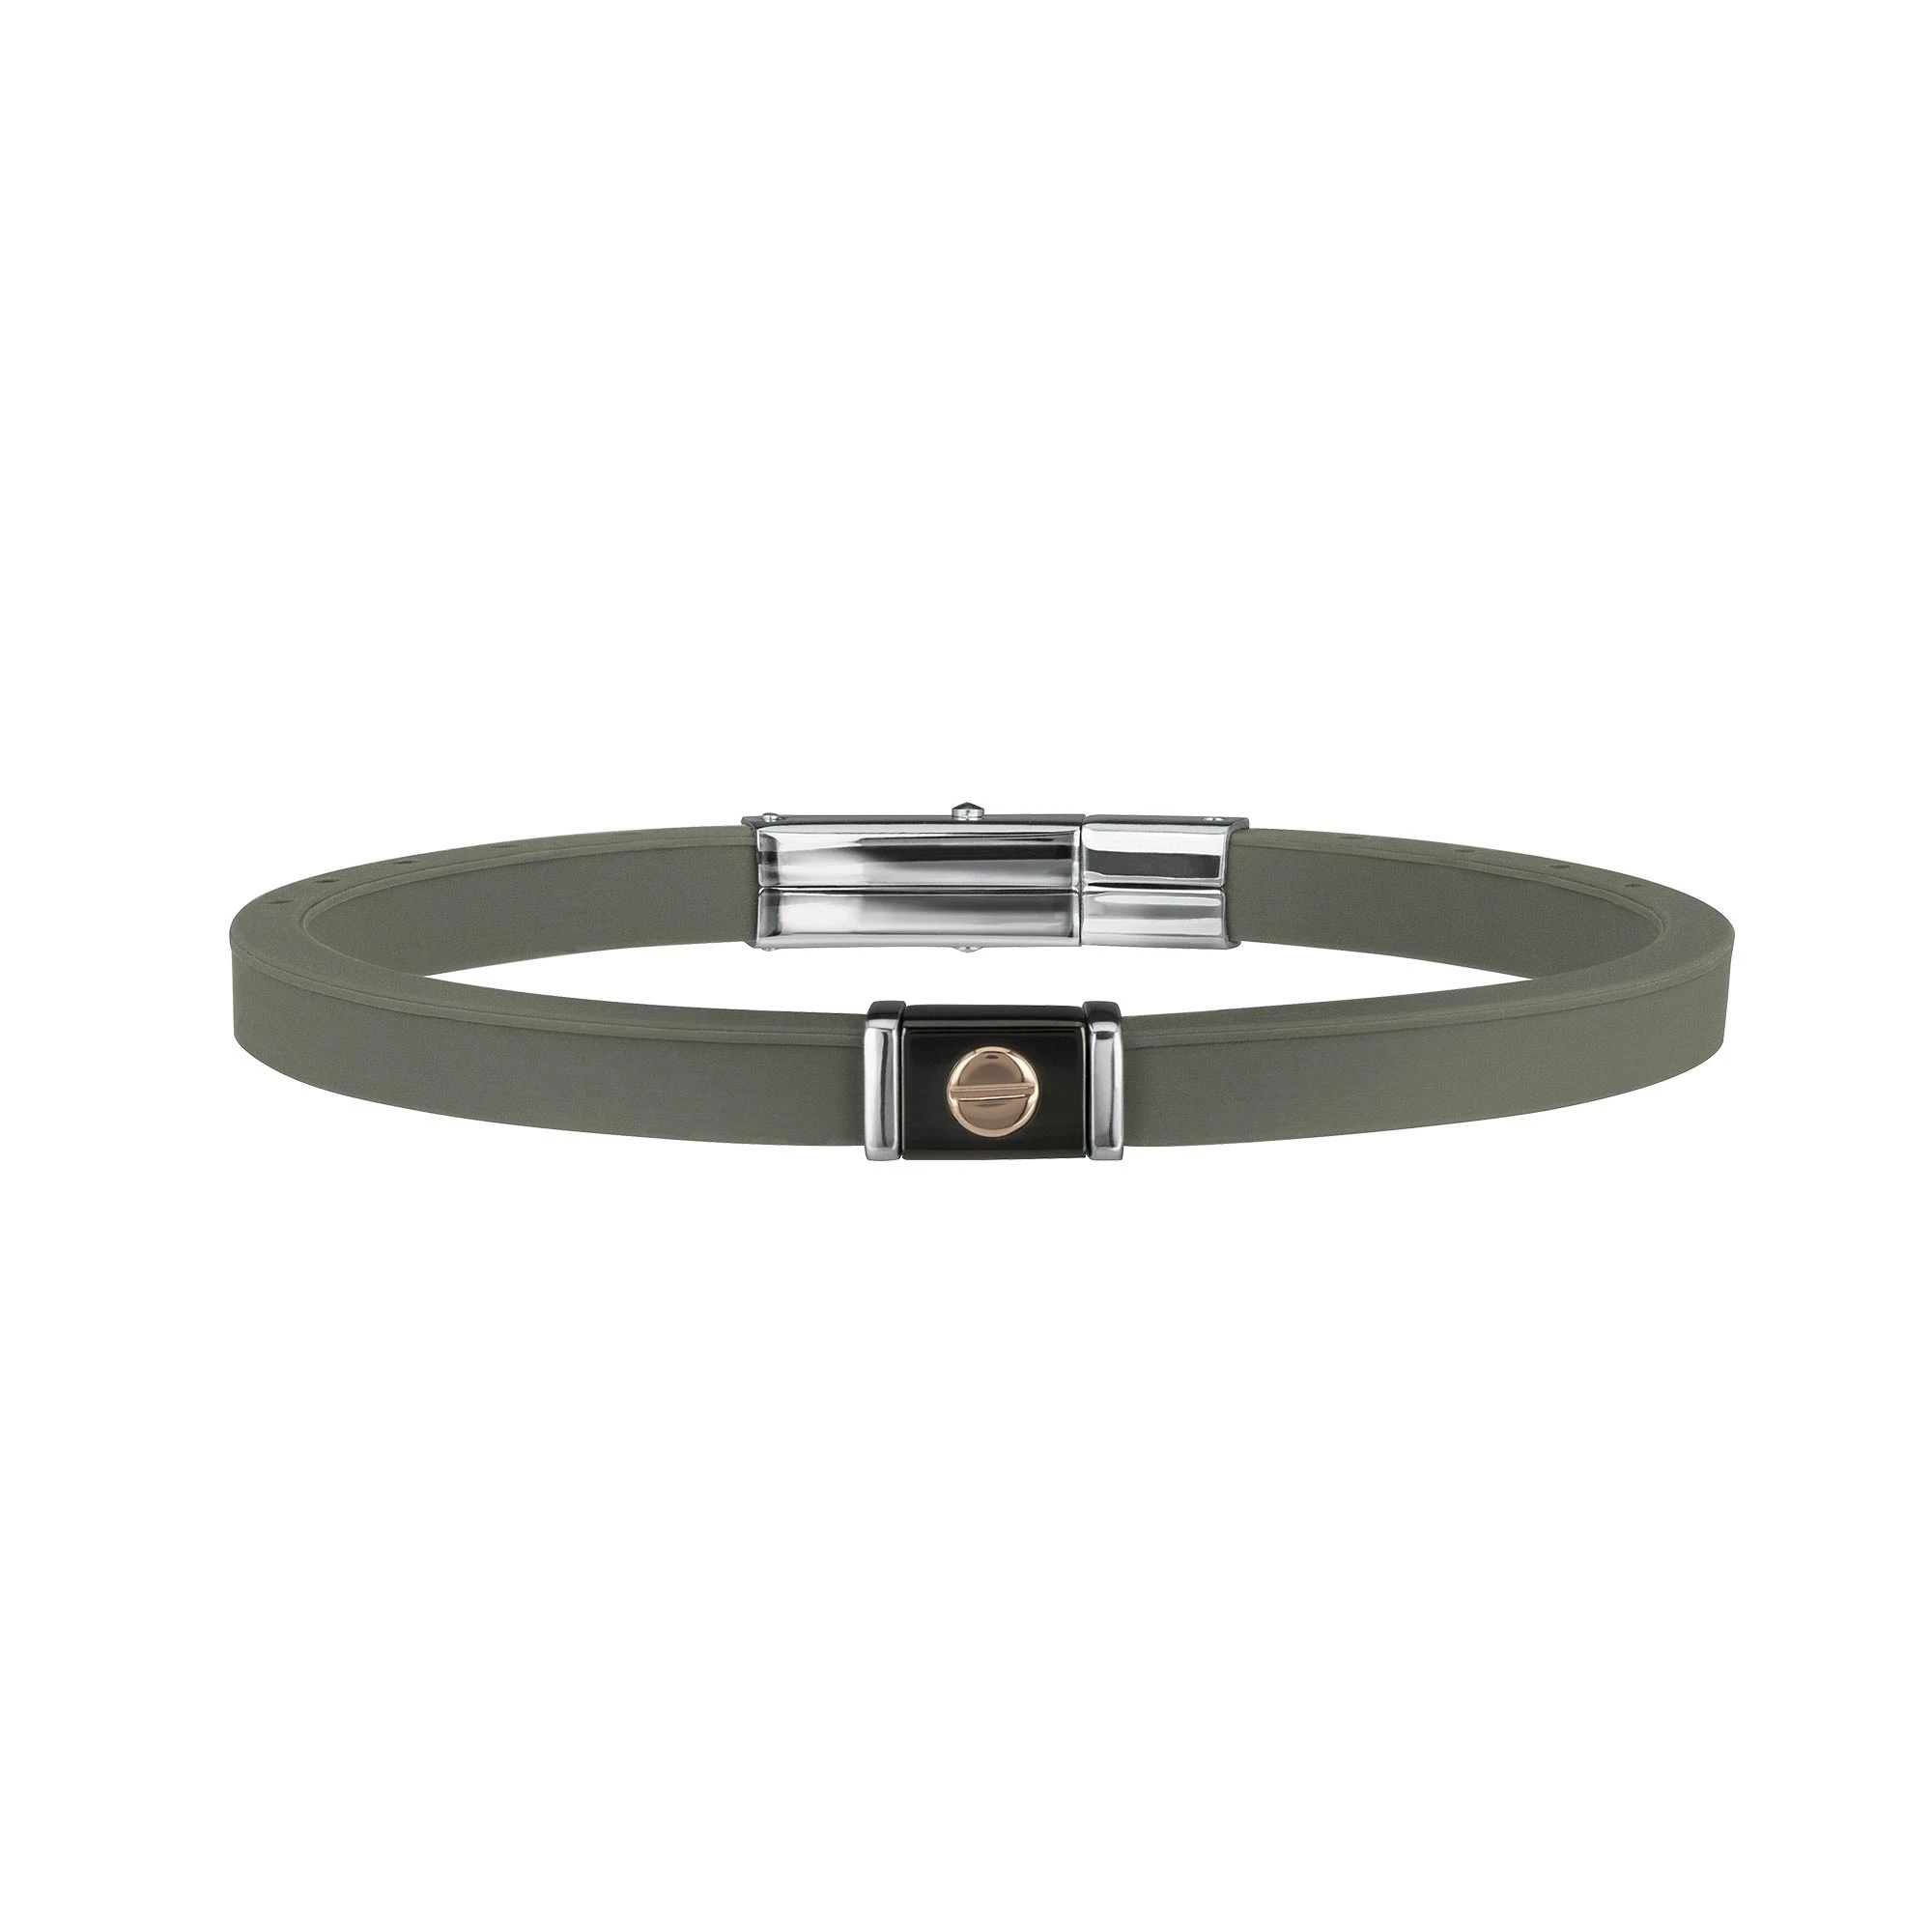 9K - SILICON BRACELET WITH STAINLESS STEEL INSERTS AND 9K ROSE GOLD DETAIL - 1 - TJ1941 | Breil